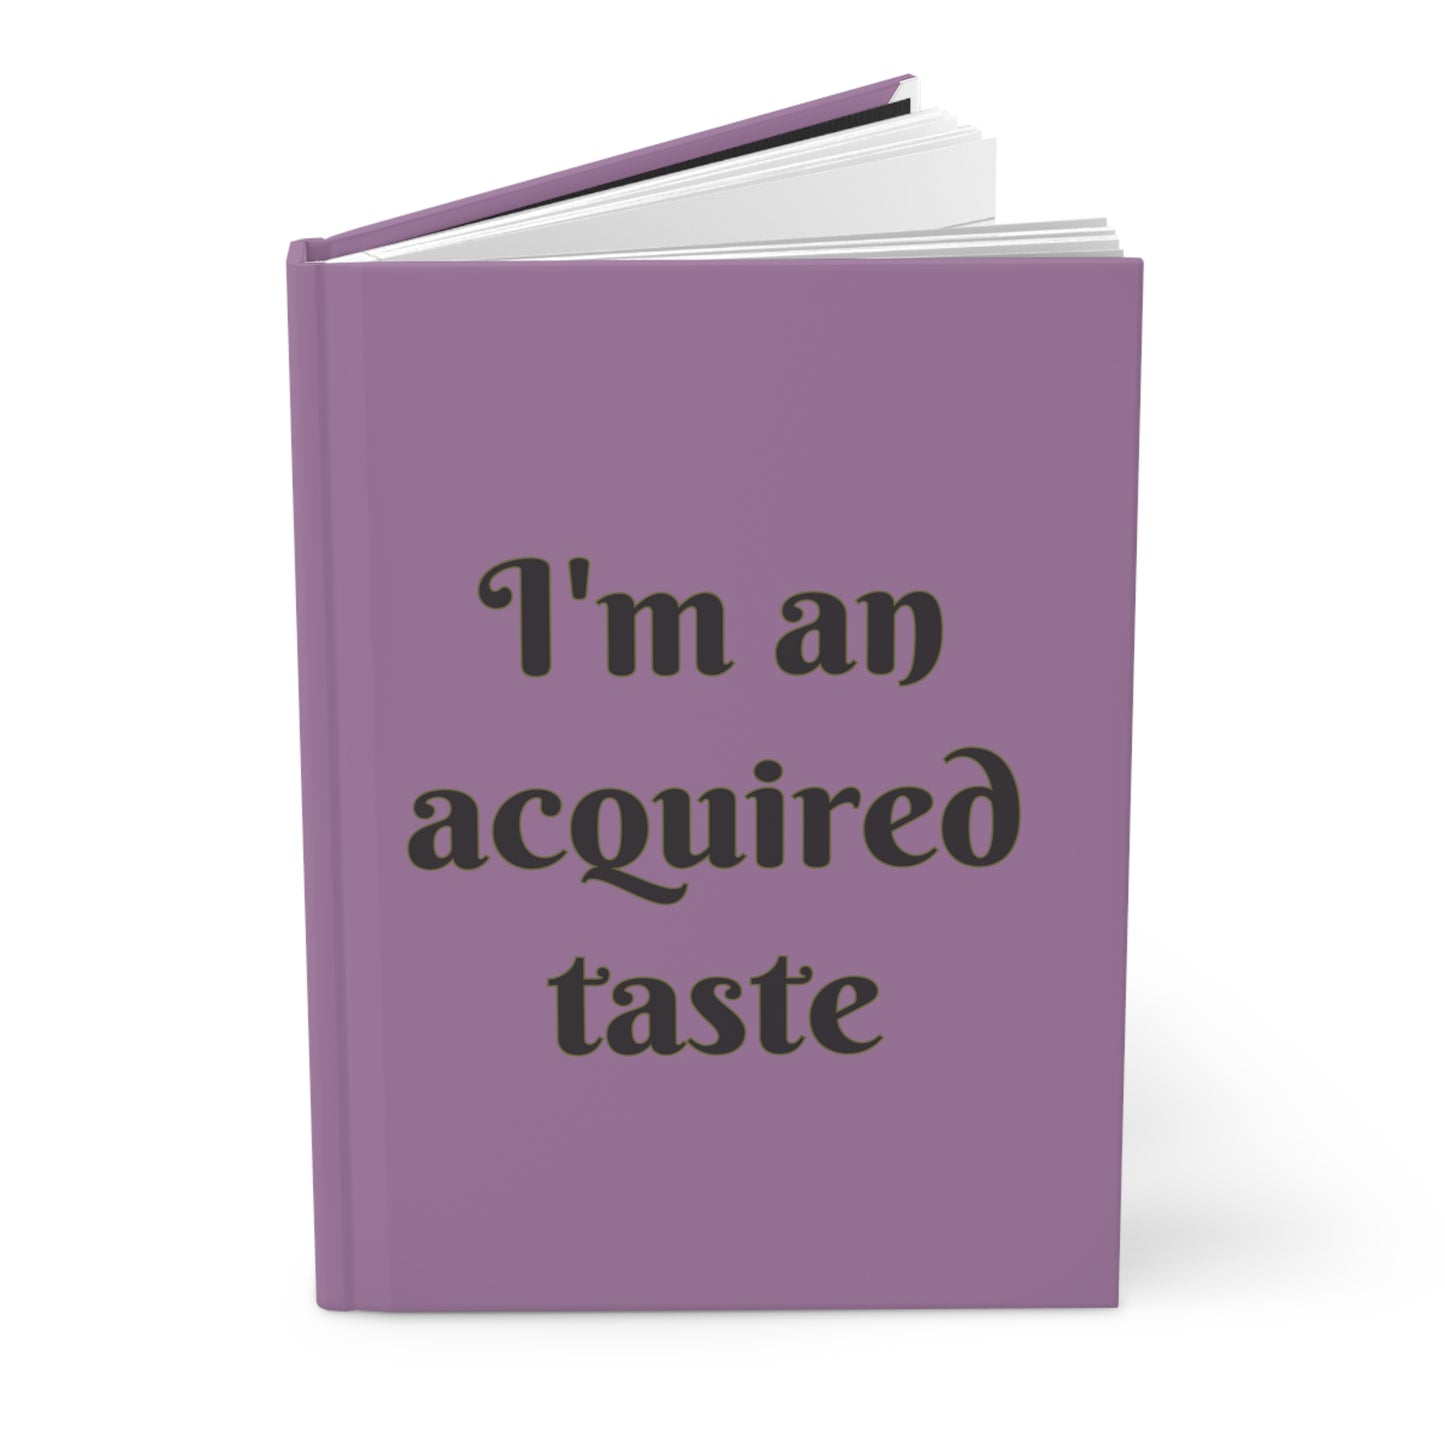 Acquired Taste Hardcover Notebook Journal - Daily Wellness, Gratitude, Mindfulness, Self Care, Desk Accessory, 5.75x7.5" Lined Journal